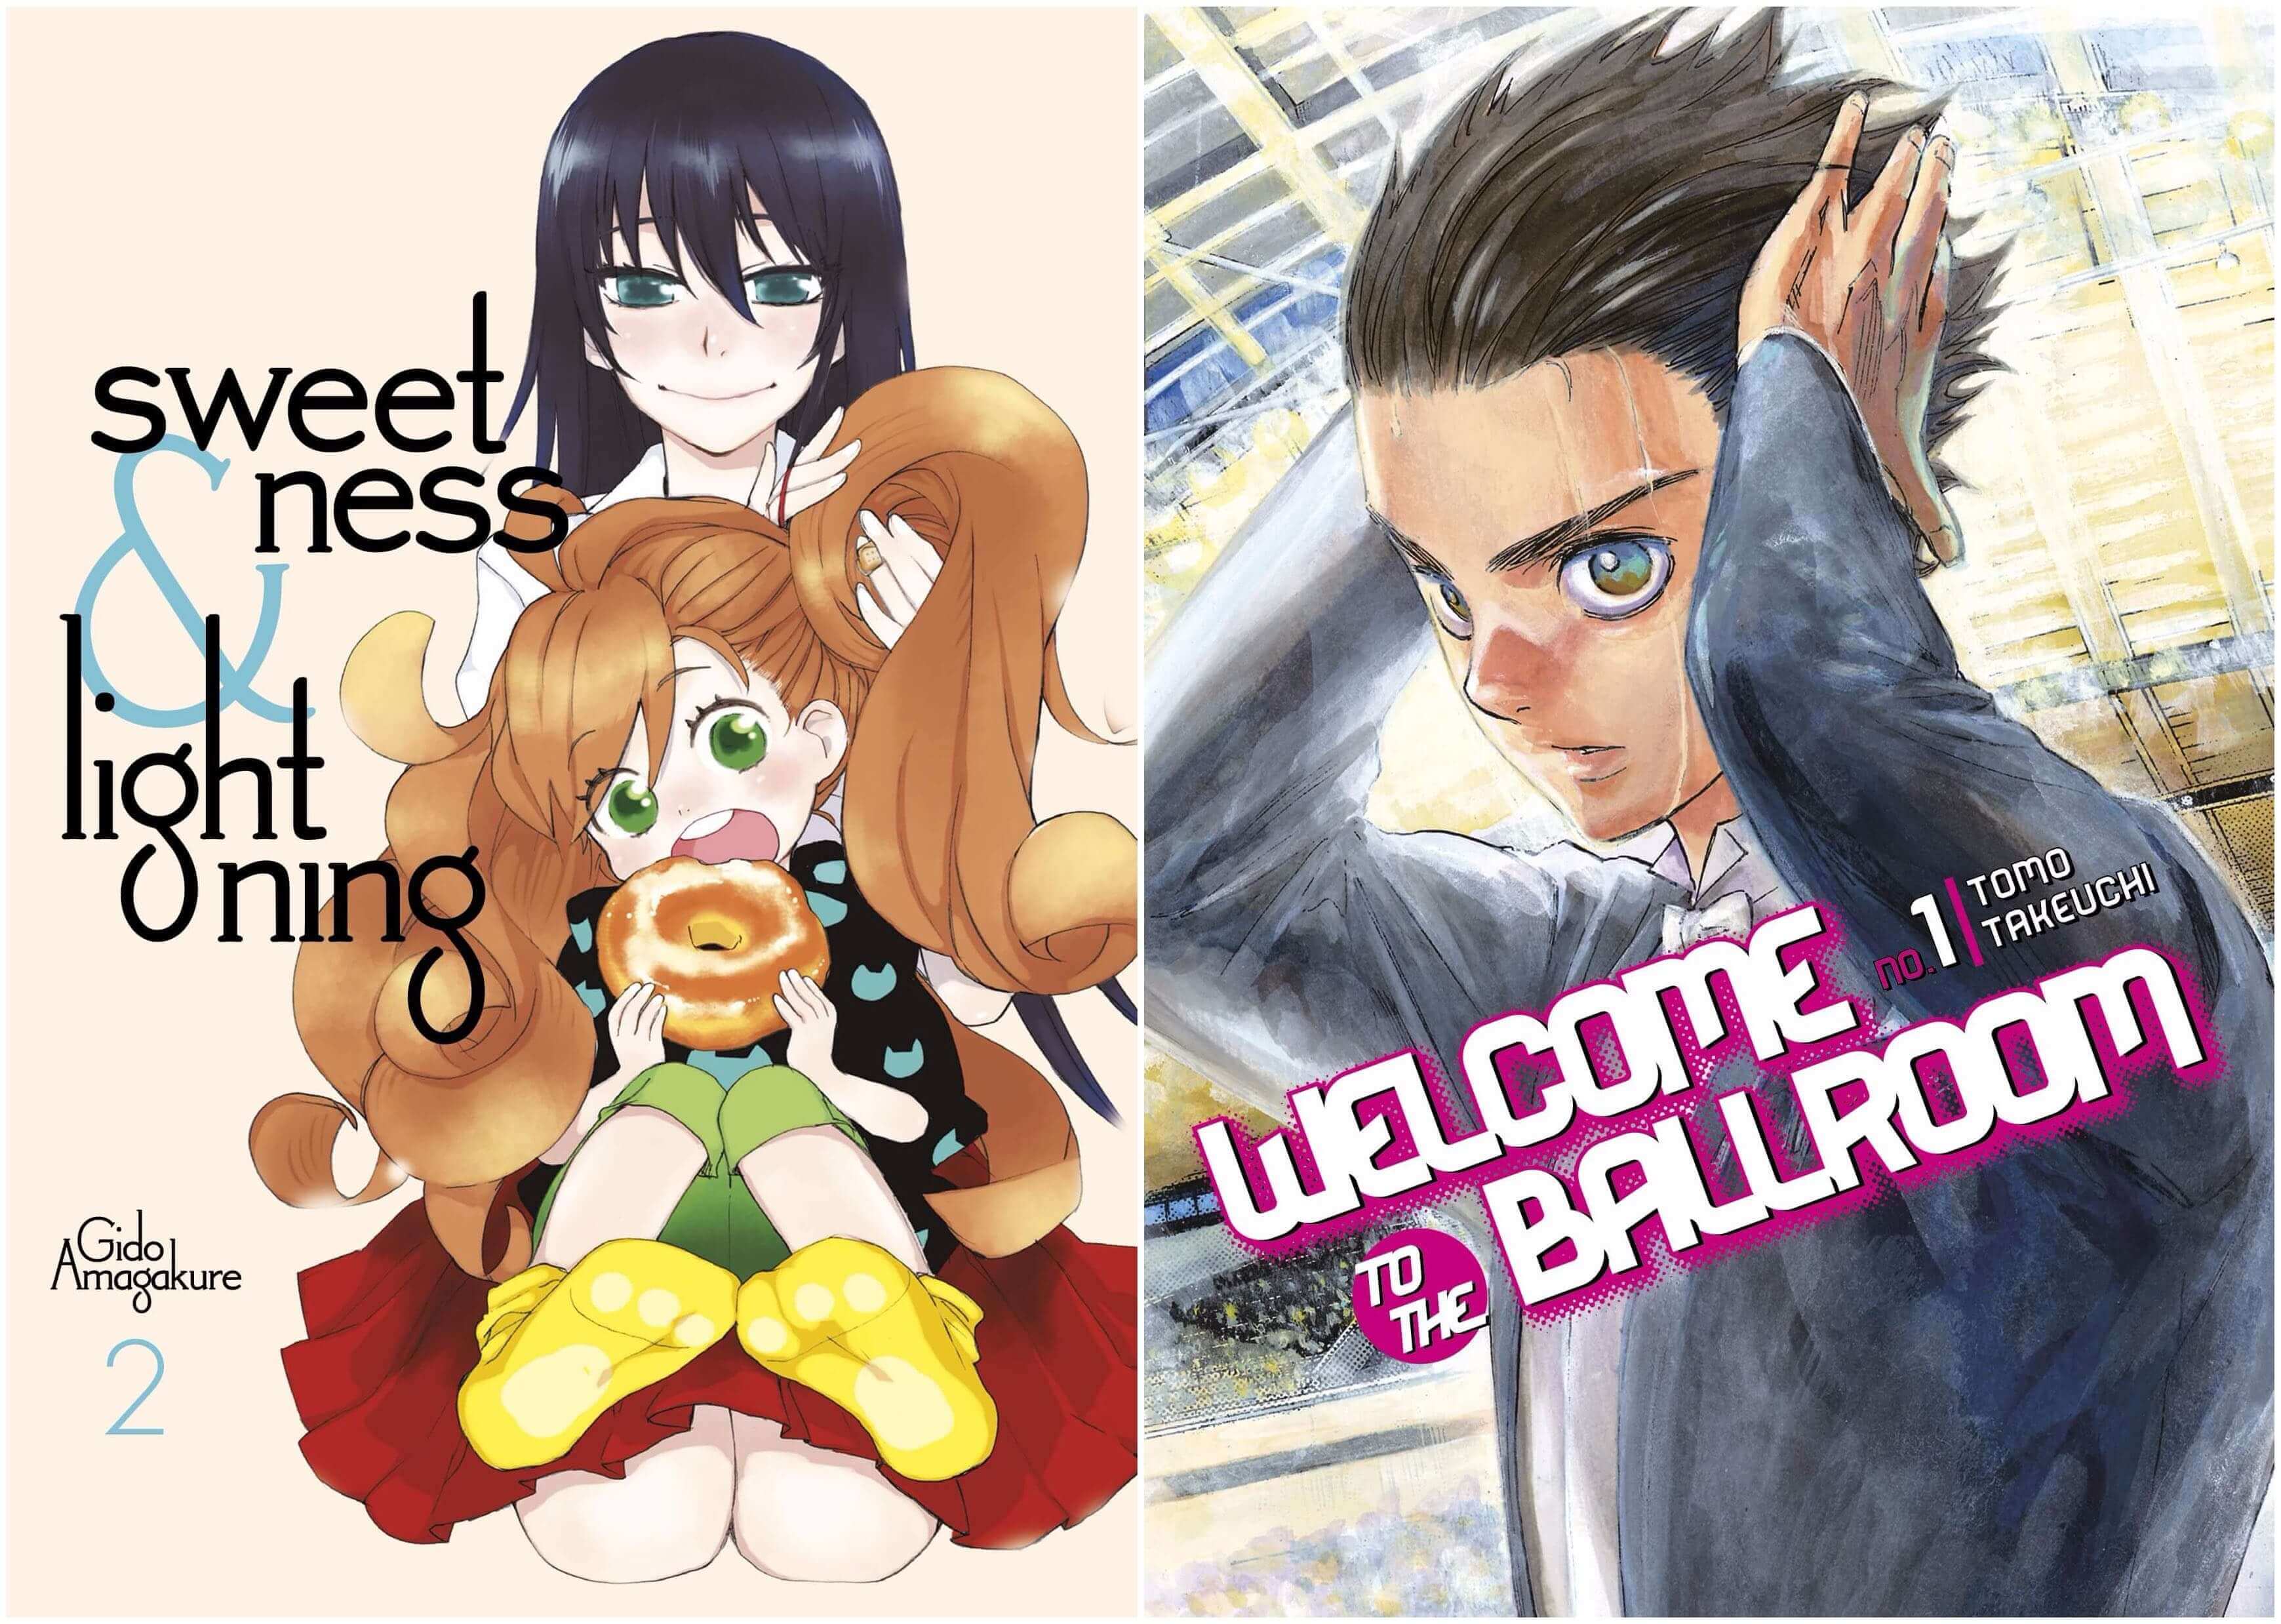 September 2016 Manga Releases Covers for Sweetness and Lightning and Welcome to the Ballroom.